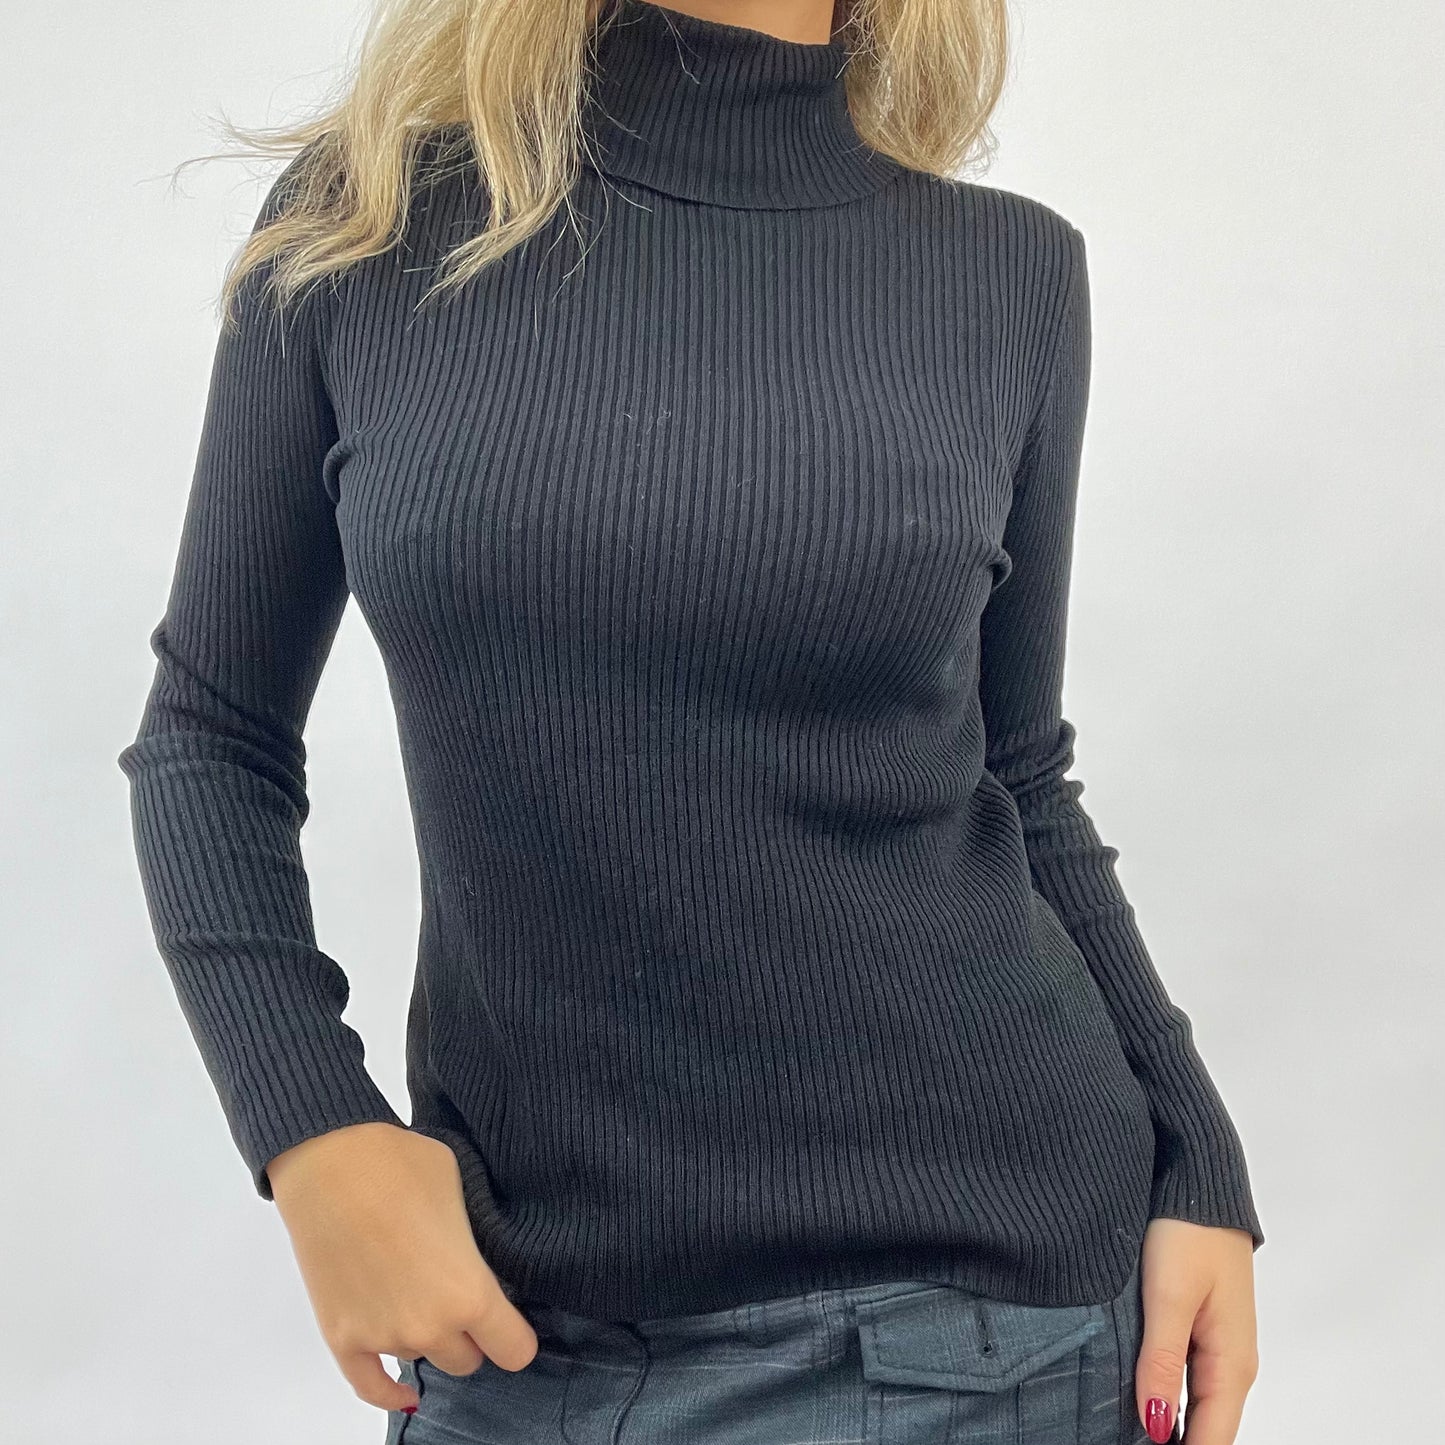 CORPCORE DROP | small black ribbed knit turtleneck jumper